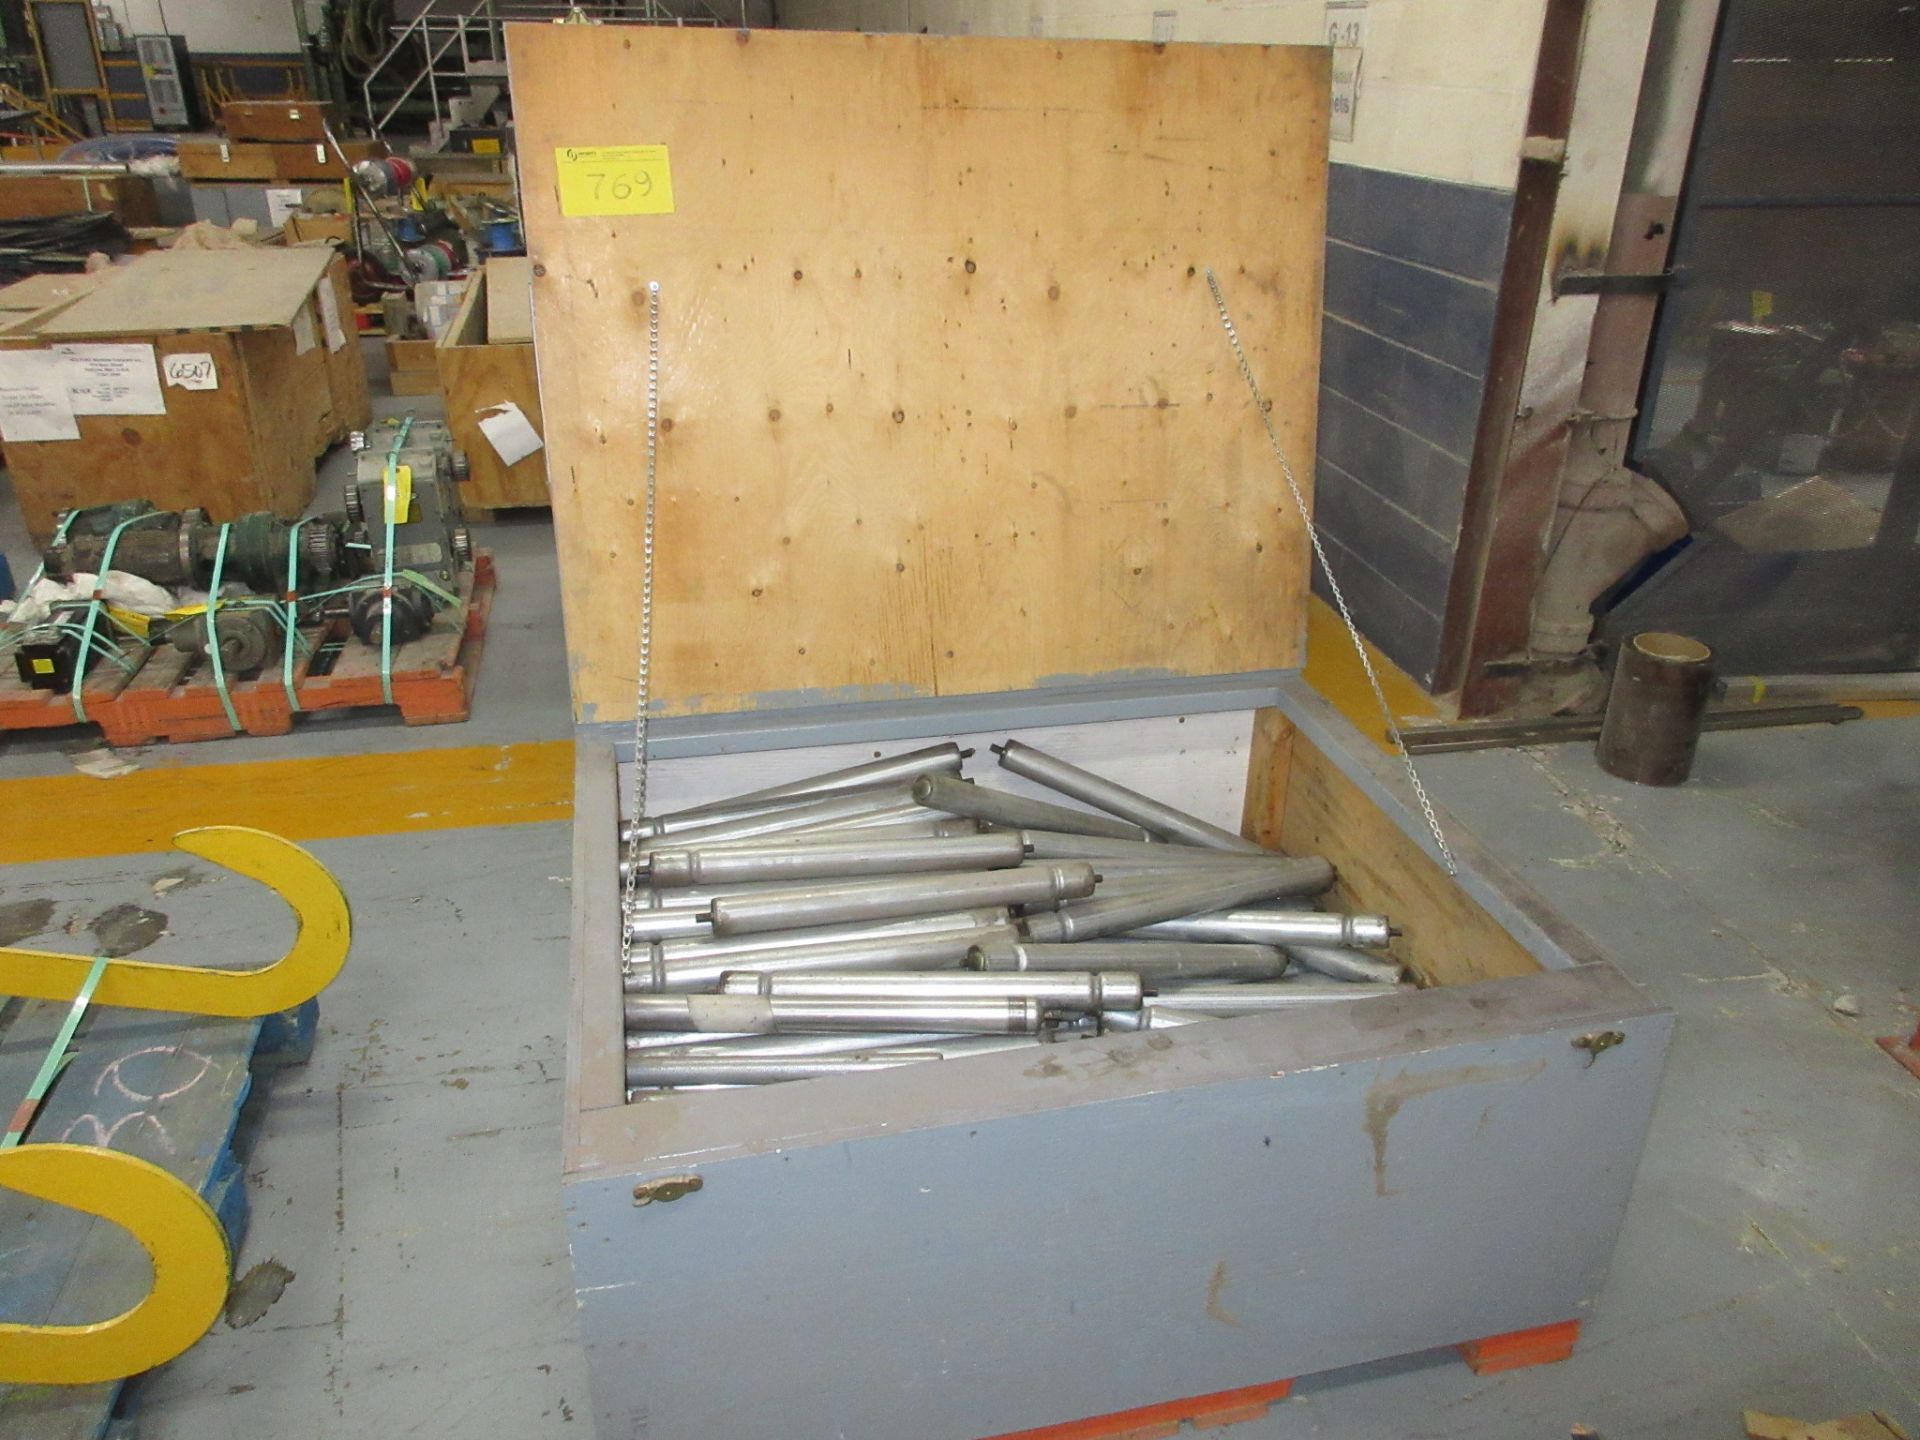 LOT OF WOOD CRATE AND PALLET OF METAL ROLLERS, 22"/26" (MAINTENANCE SHOP AREA) - Image 2 of 2